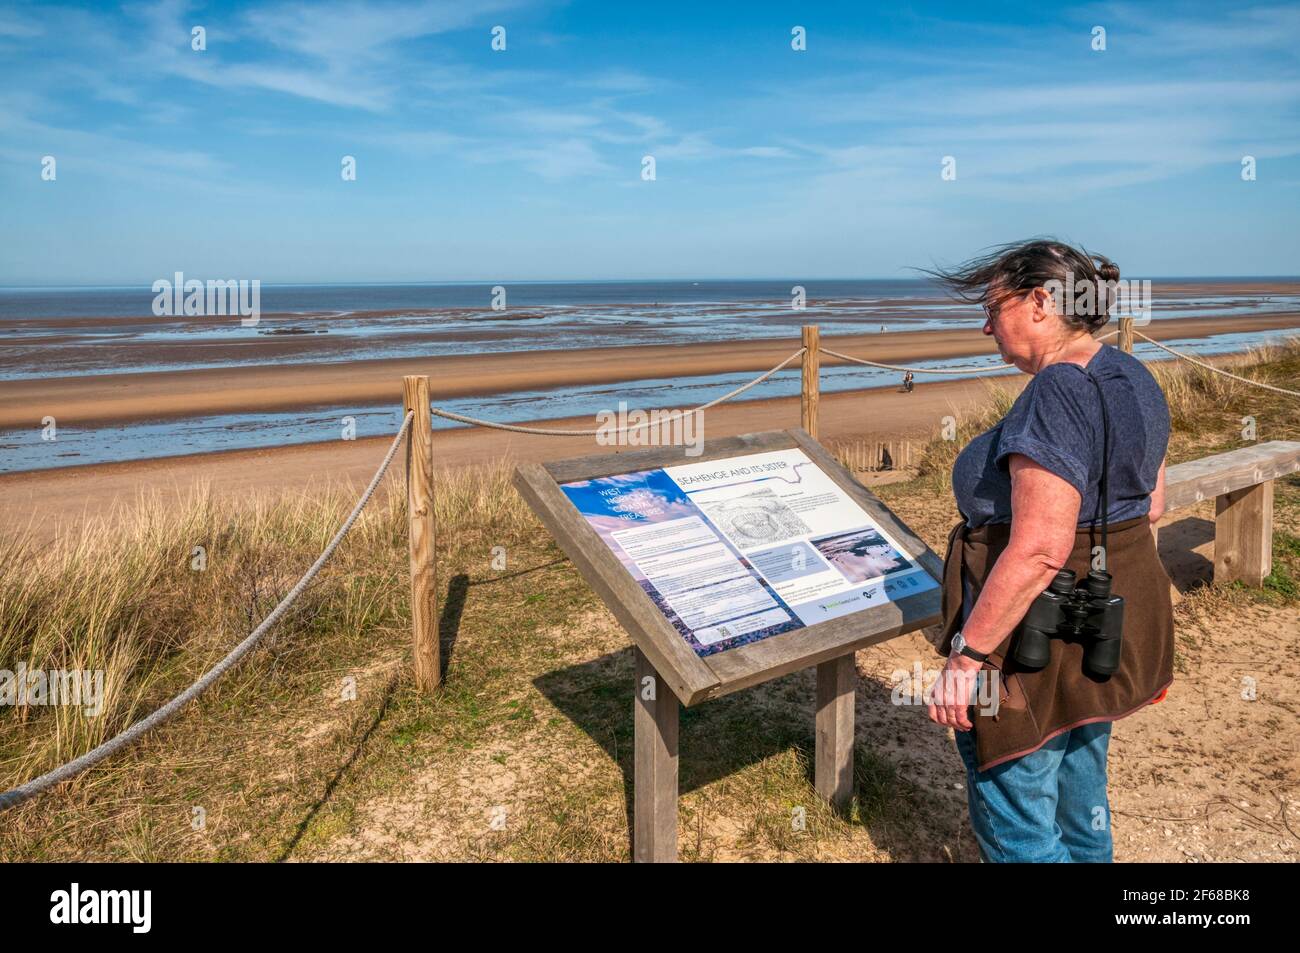 Woman reading an interpretative sign at the discovery site of Seahenge at Holme-next-the-Sea on the North Norfolk coast. Stock Photo